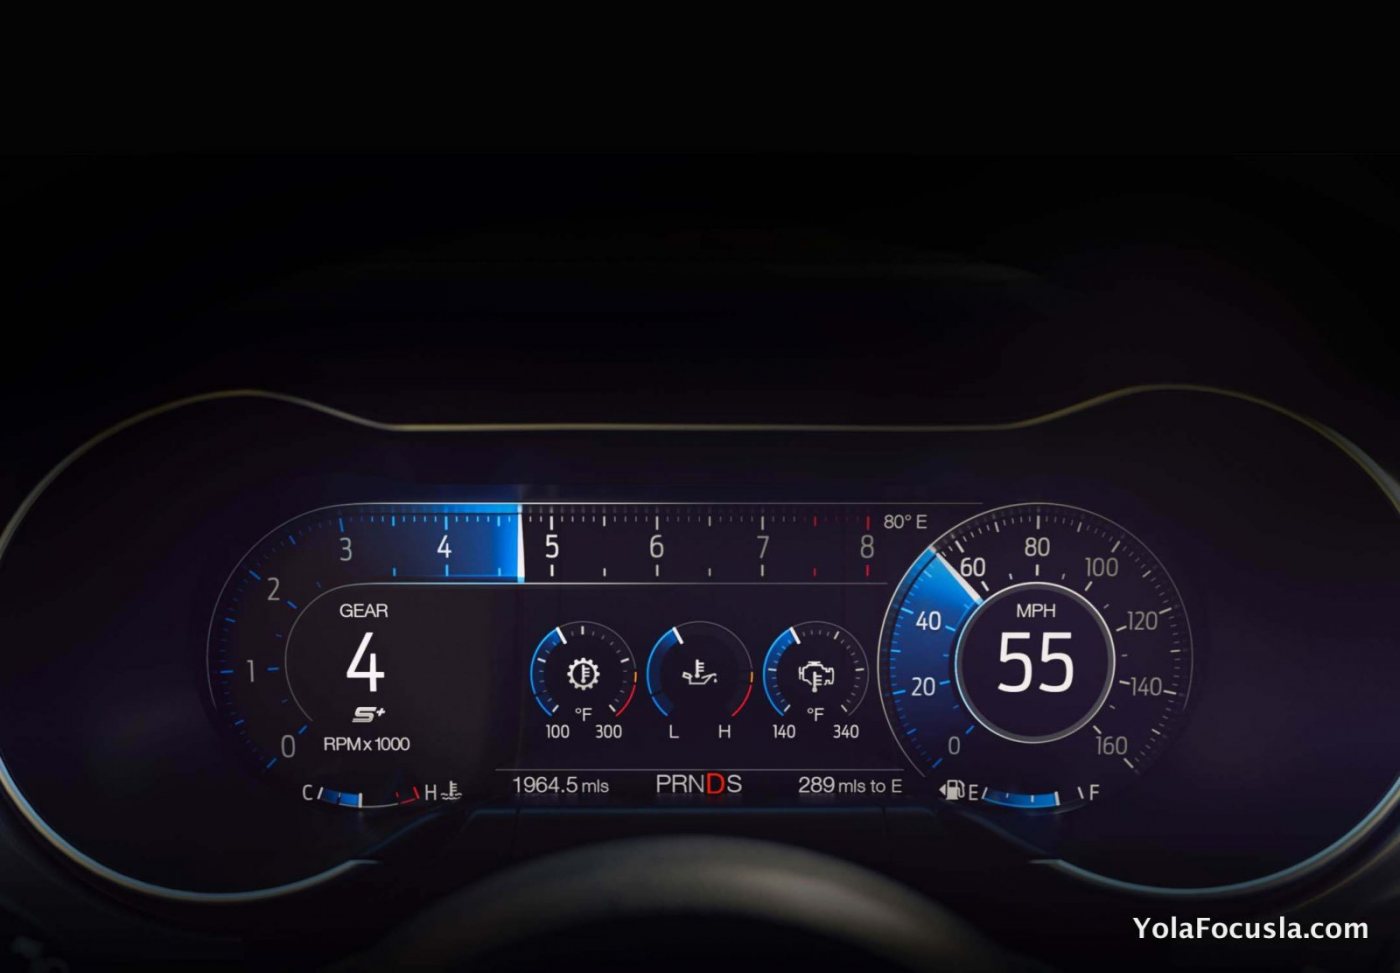 New-Ford-Mustang-12-inch-LCD-digital-instrument-cluster-in-Sport-View.jpg